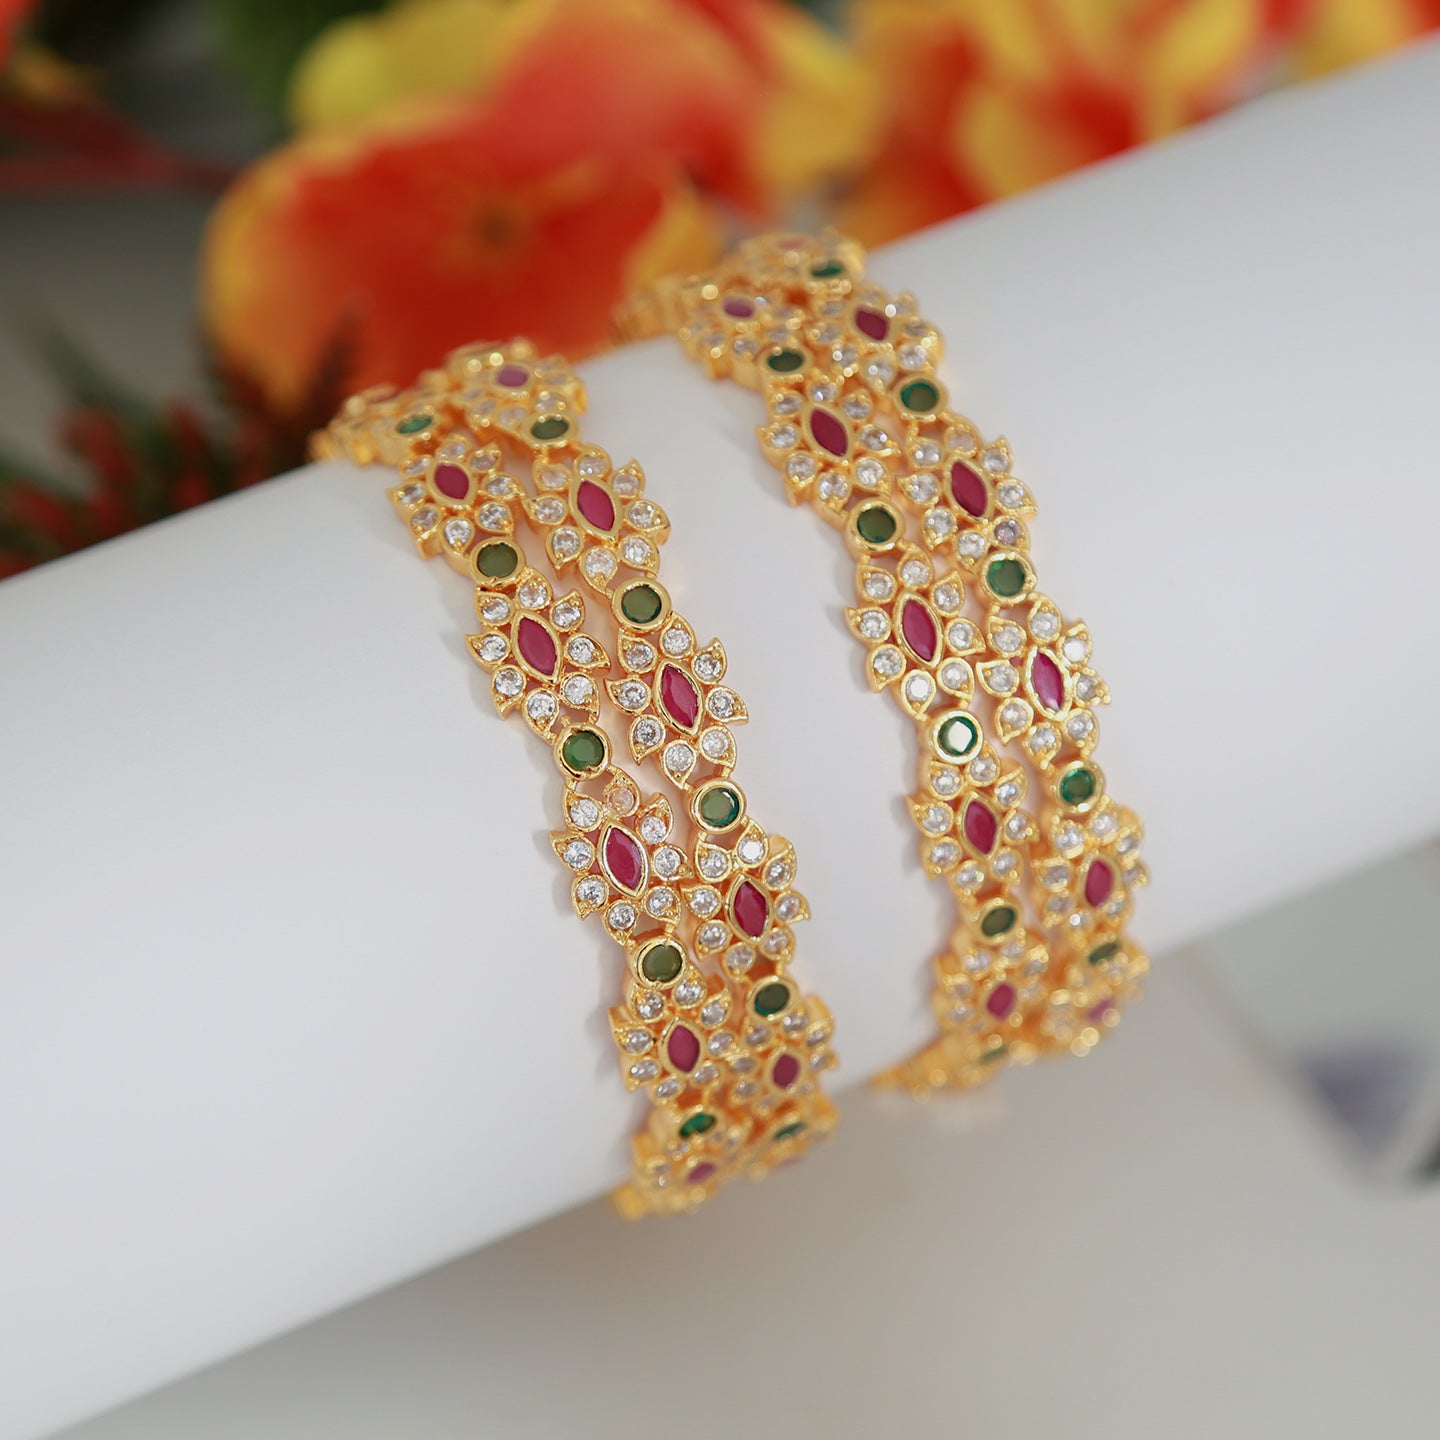 22k Gold tone American Diamond CZ Floral bangles-set of 4 | Ruby Emerald white stone Floral Design Indian Bollywood style Party wear Bangles